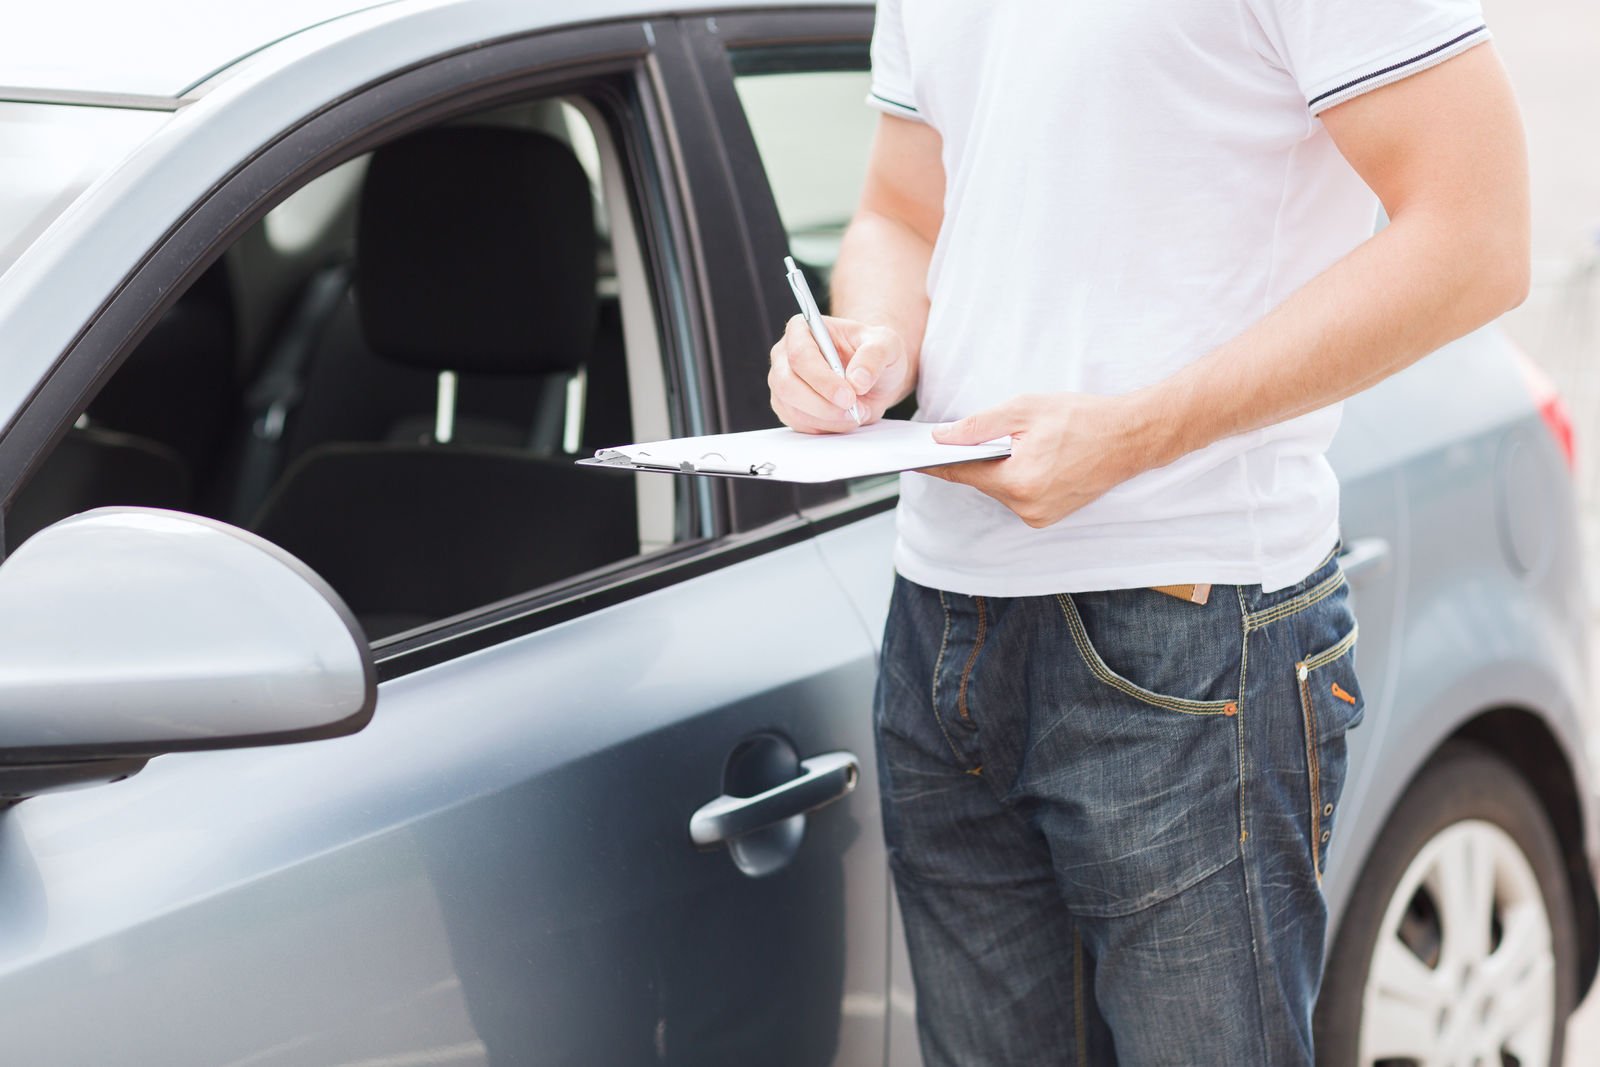 Do you have to have full coverage insurance to lease a car?